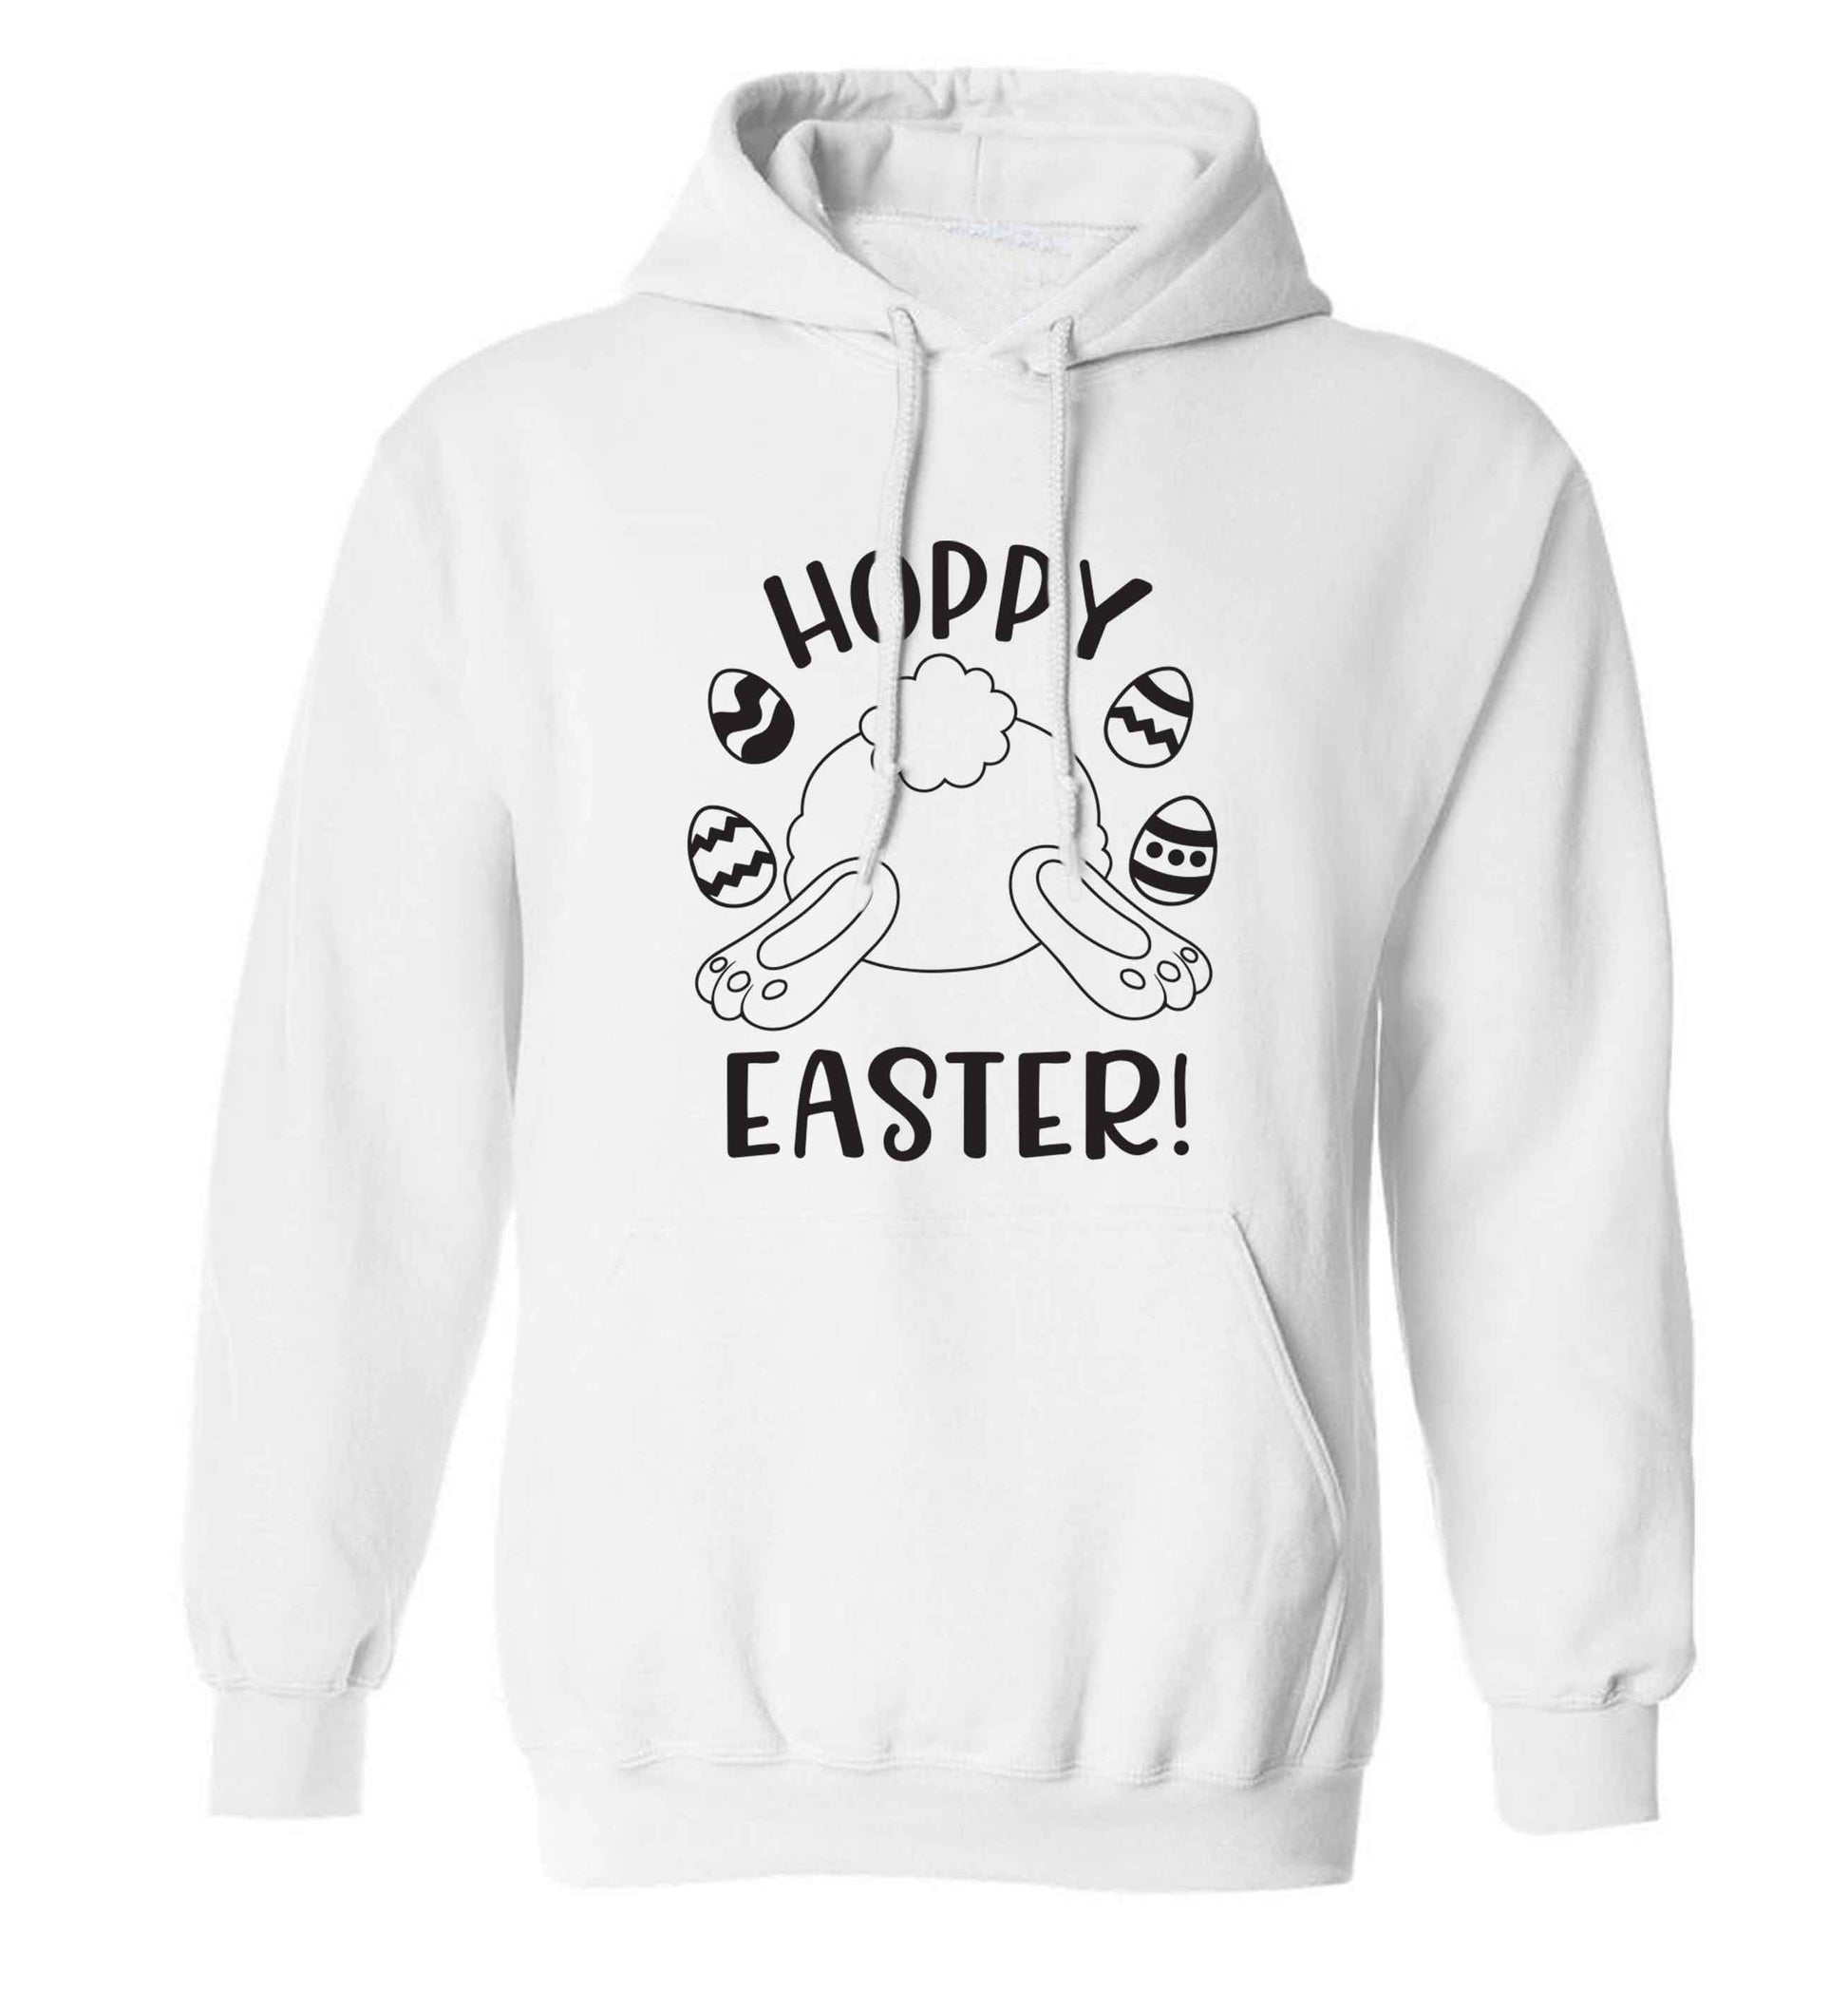 Hoppy Easter adults unisex white hoodie 2XL